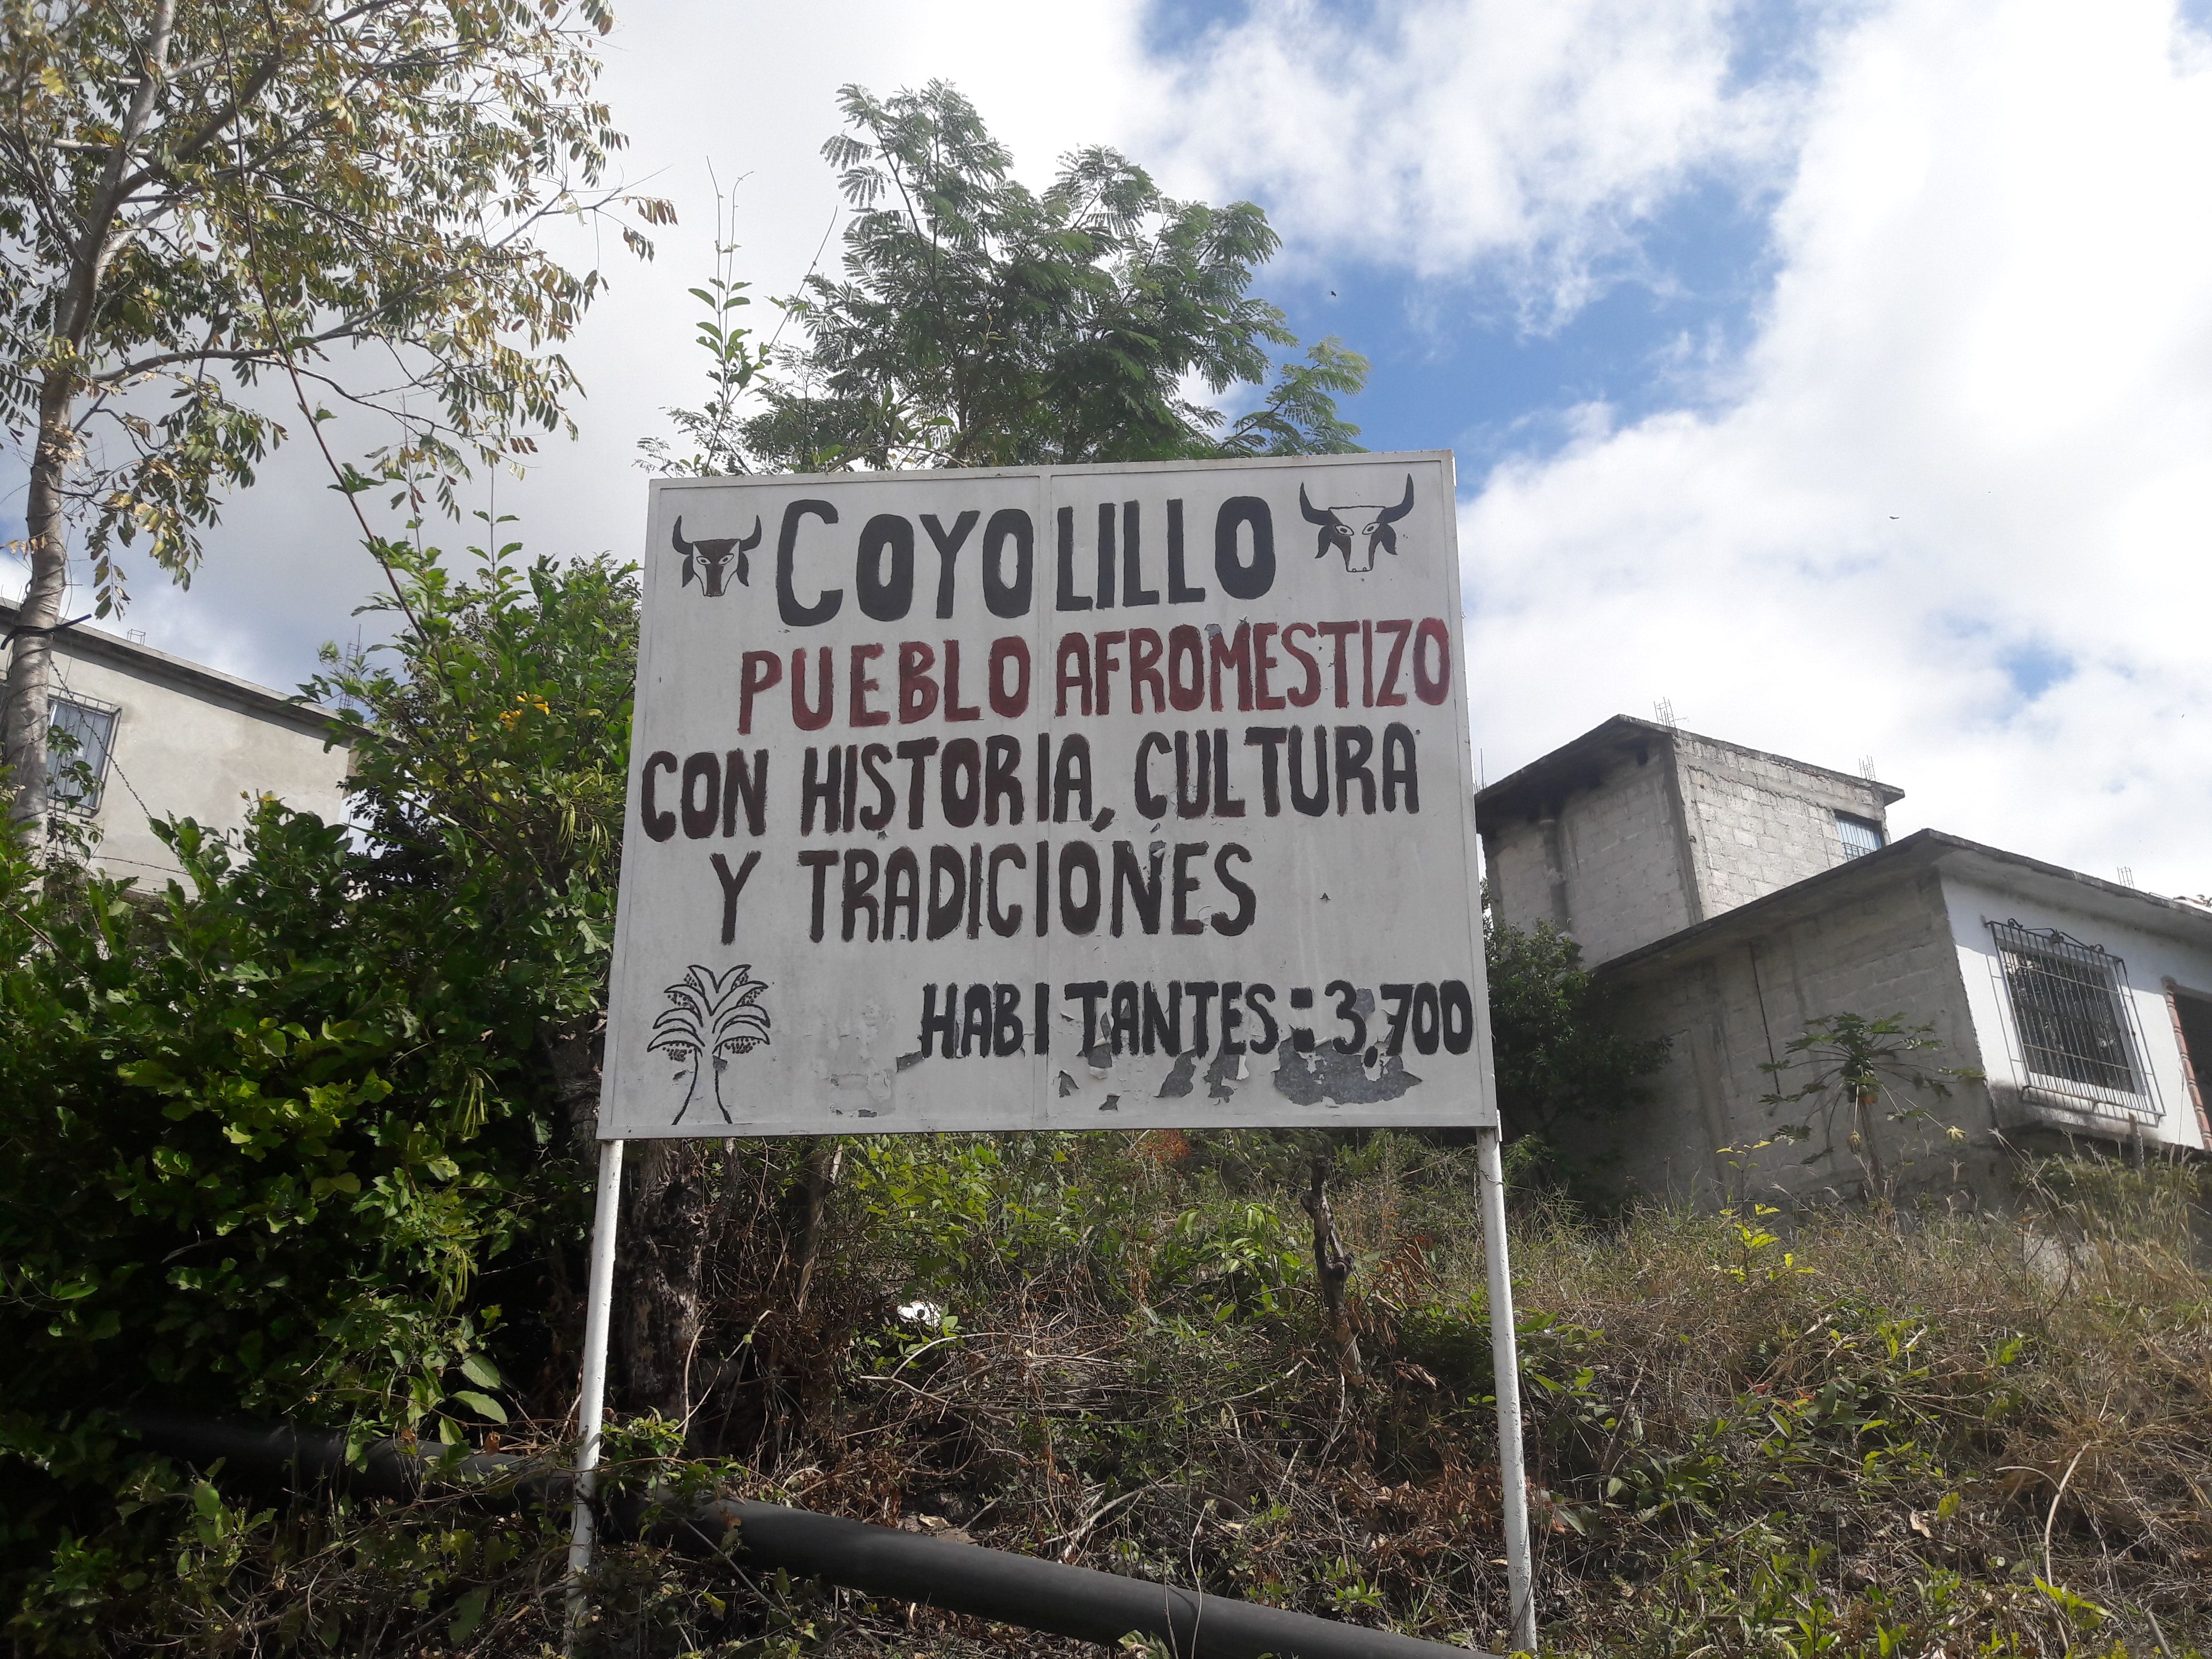 This sign welcomes newcomers and residents into the Afro-Mestizo town. Shadowing Coyolillo at the top are depictions of a bull's head, its mascot. Image by Jonathan Custodio. Mexico, 2018.